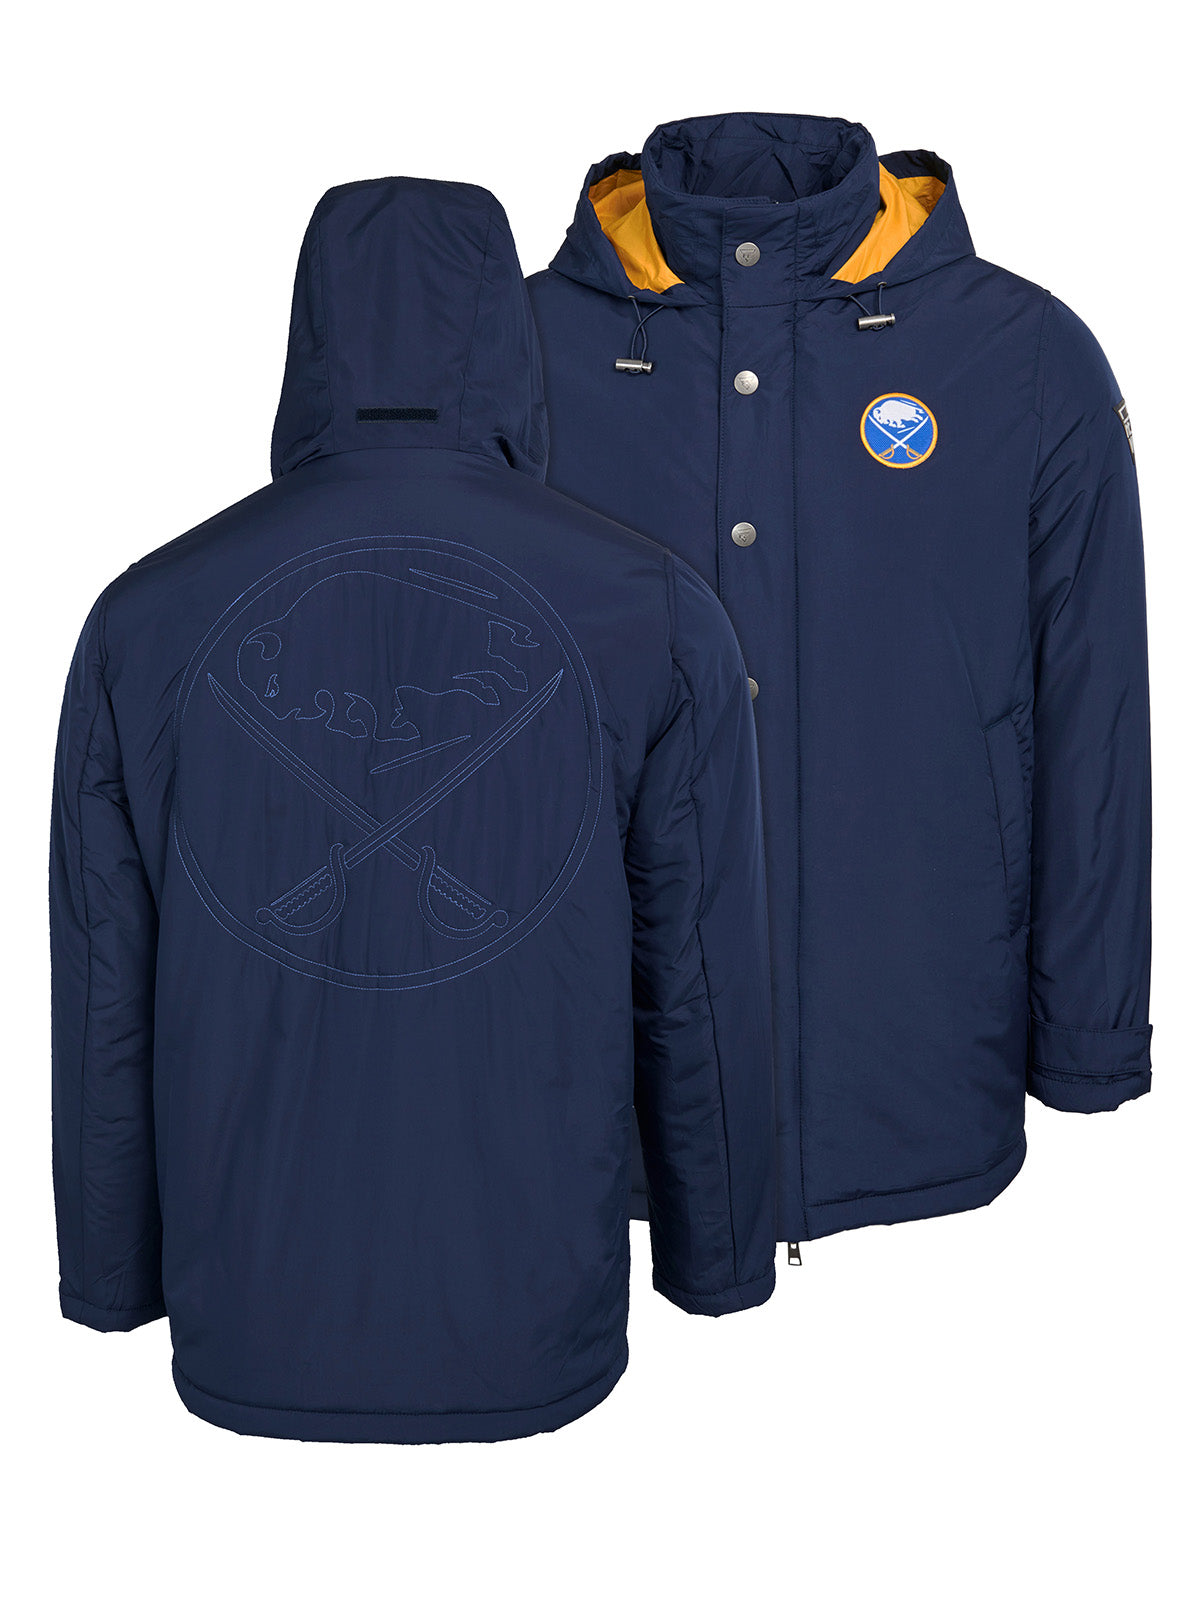 Buffalo Sabres Coach's Jacket - The jacket features a quilted stitch of the Buffalo Sabres logo centered on the back and has a removal hood in the team colors, elevating this NHL hockey clothing collection